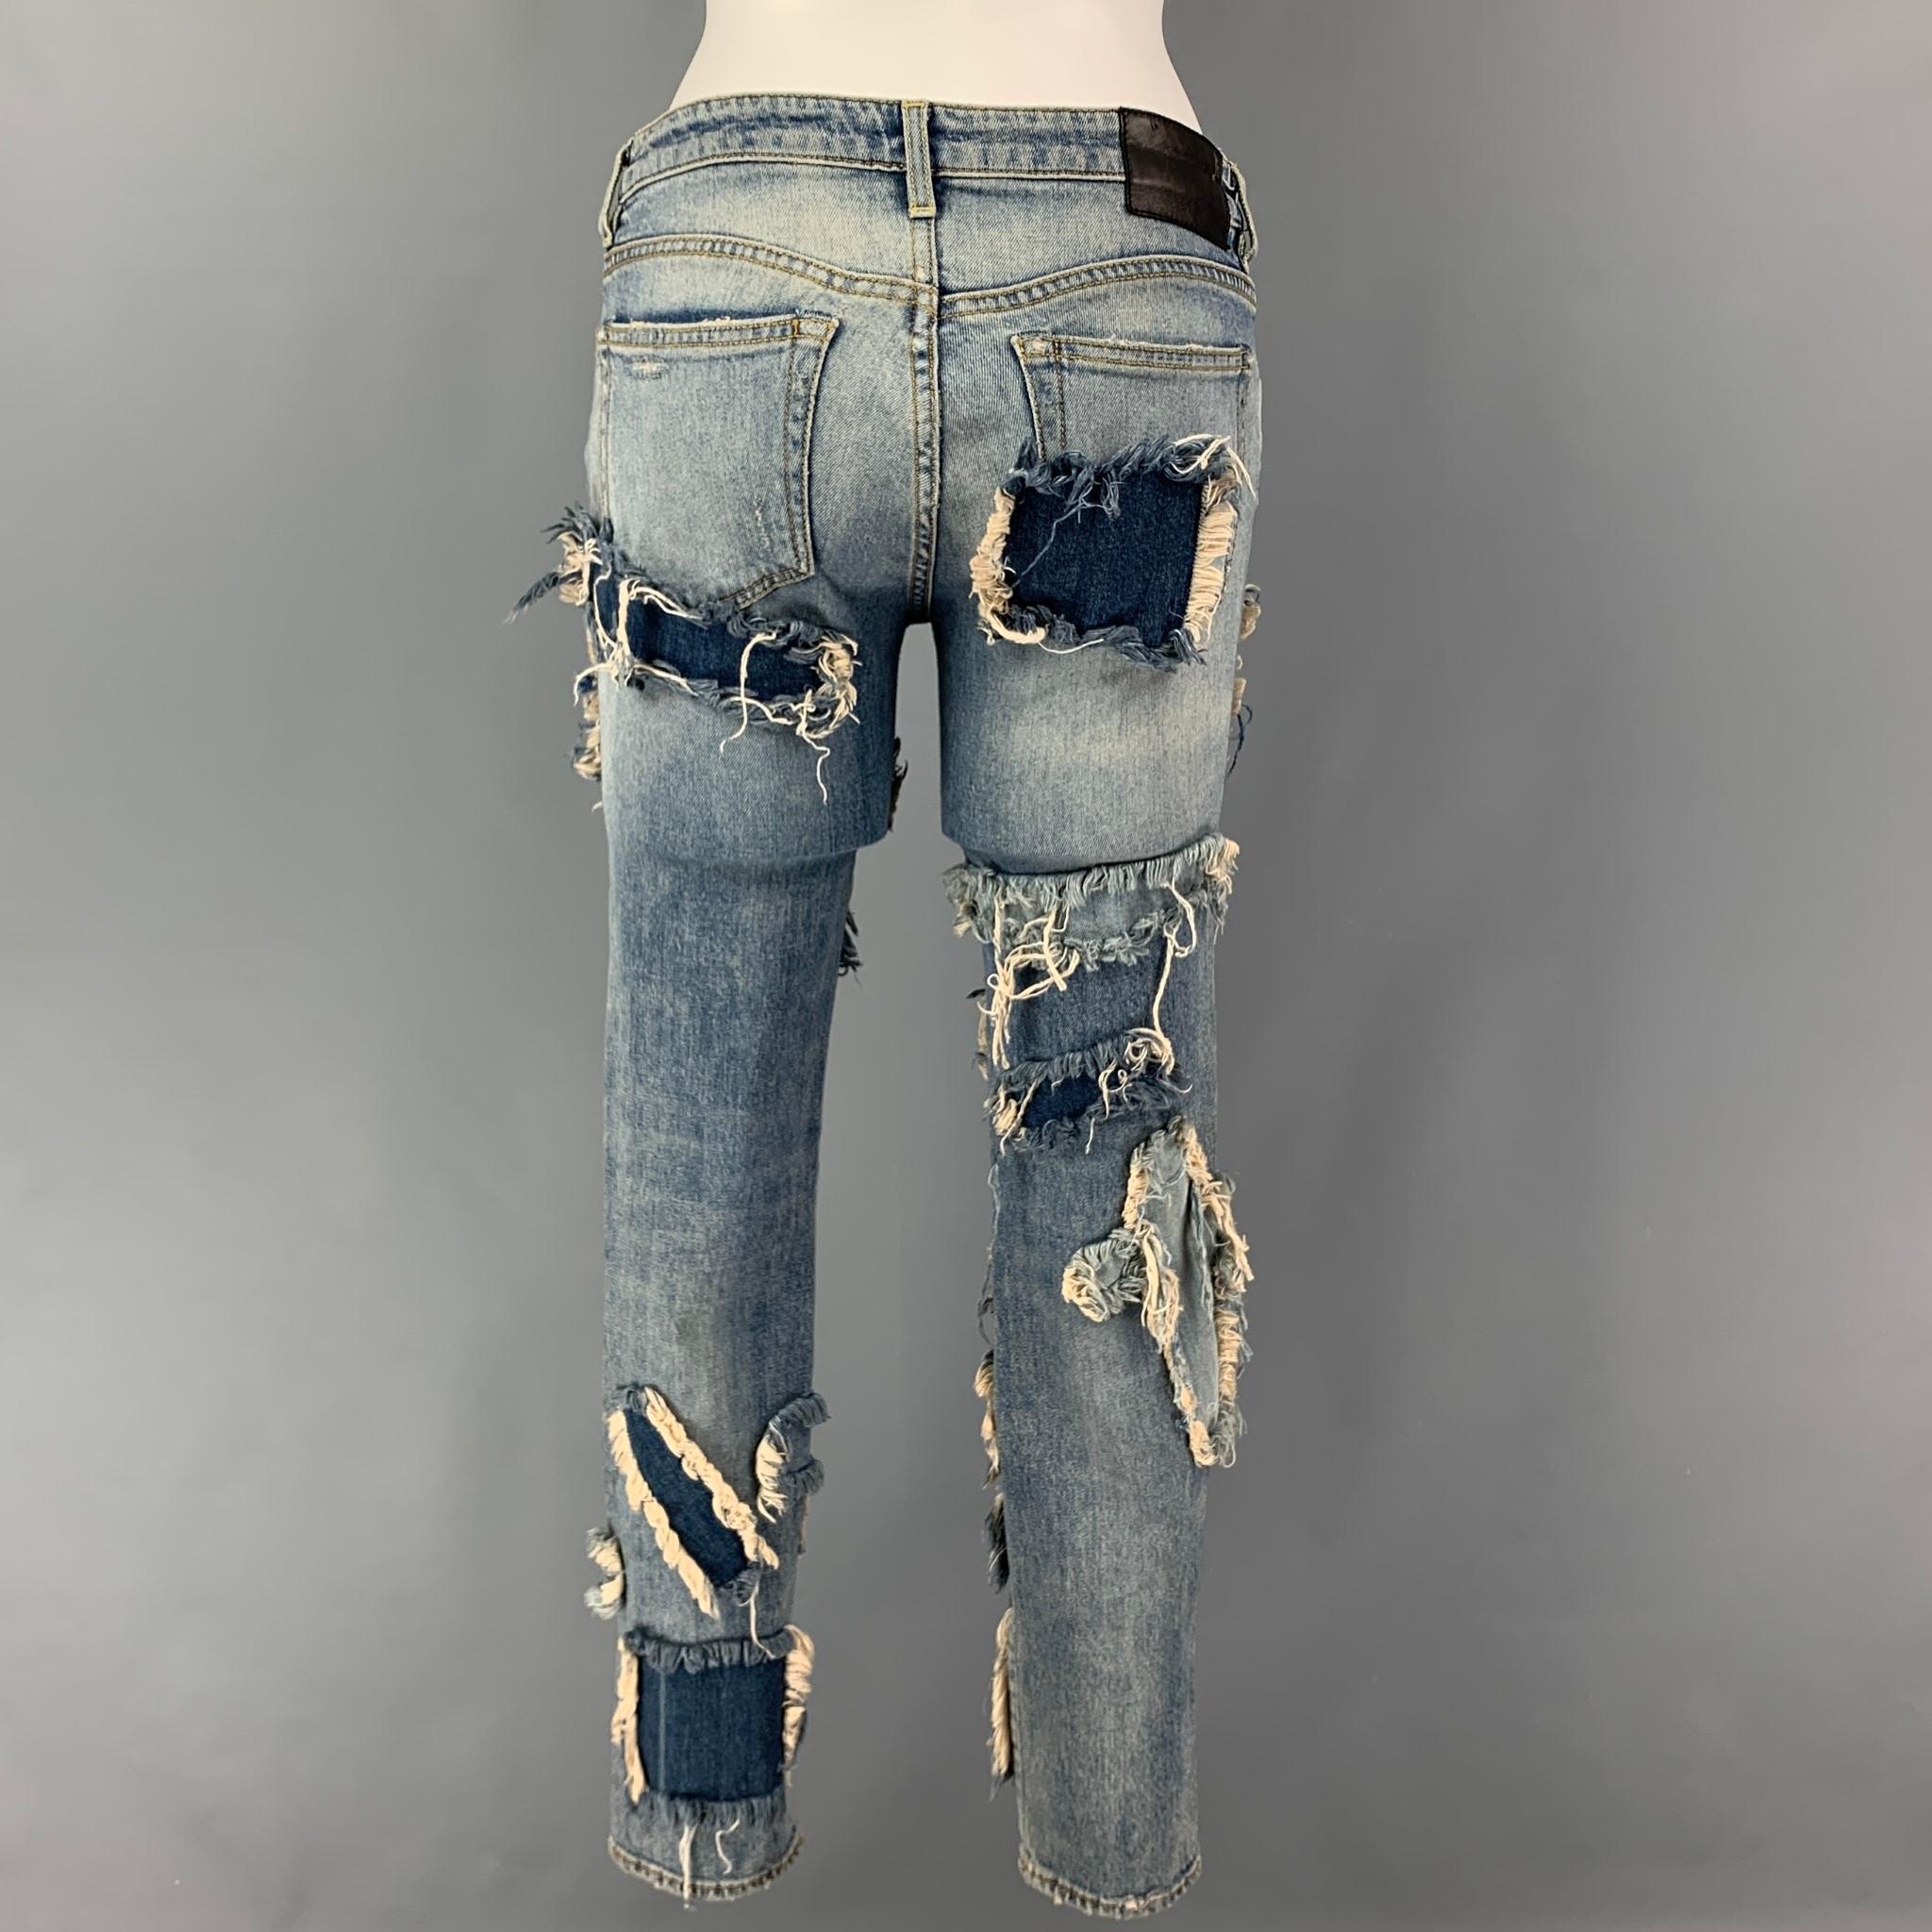 R13 jeans comes in a blue indigo denim featuring a skinny fit, distressed details throughout, contrast stitching, and a zip fly closure. Made in Italy.

Very Good Pre-Owned Condition.
Marked: 26

Measurements:

Waist: 28 in.
Rise: 9 in.
Inseam: 29